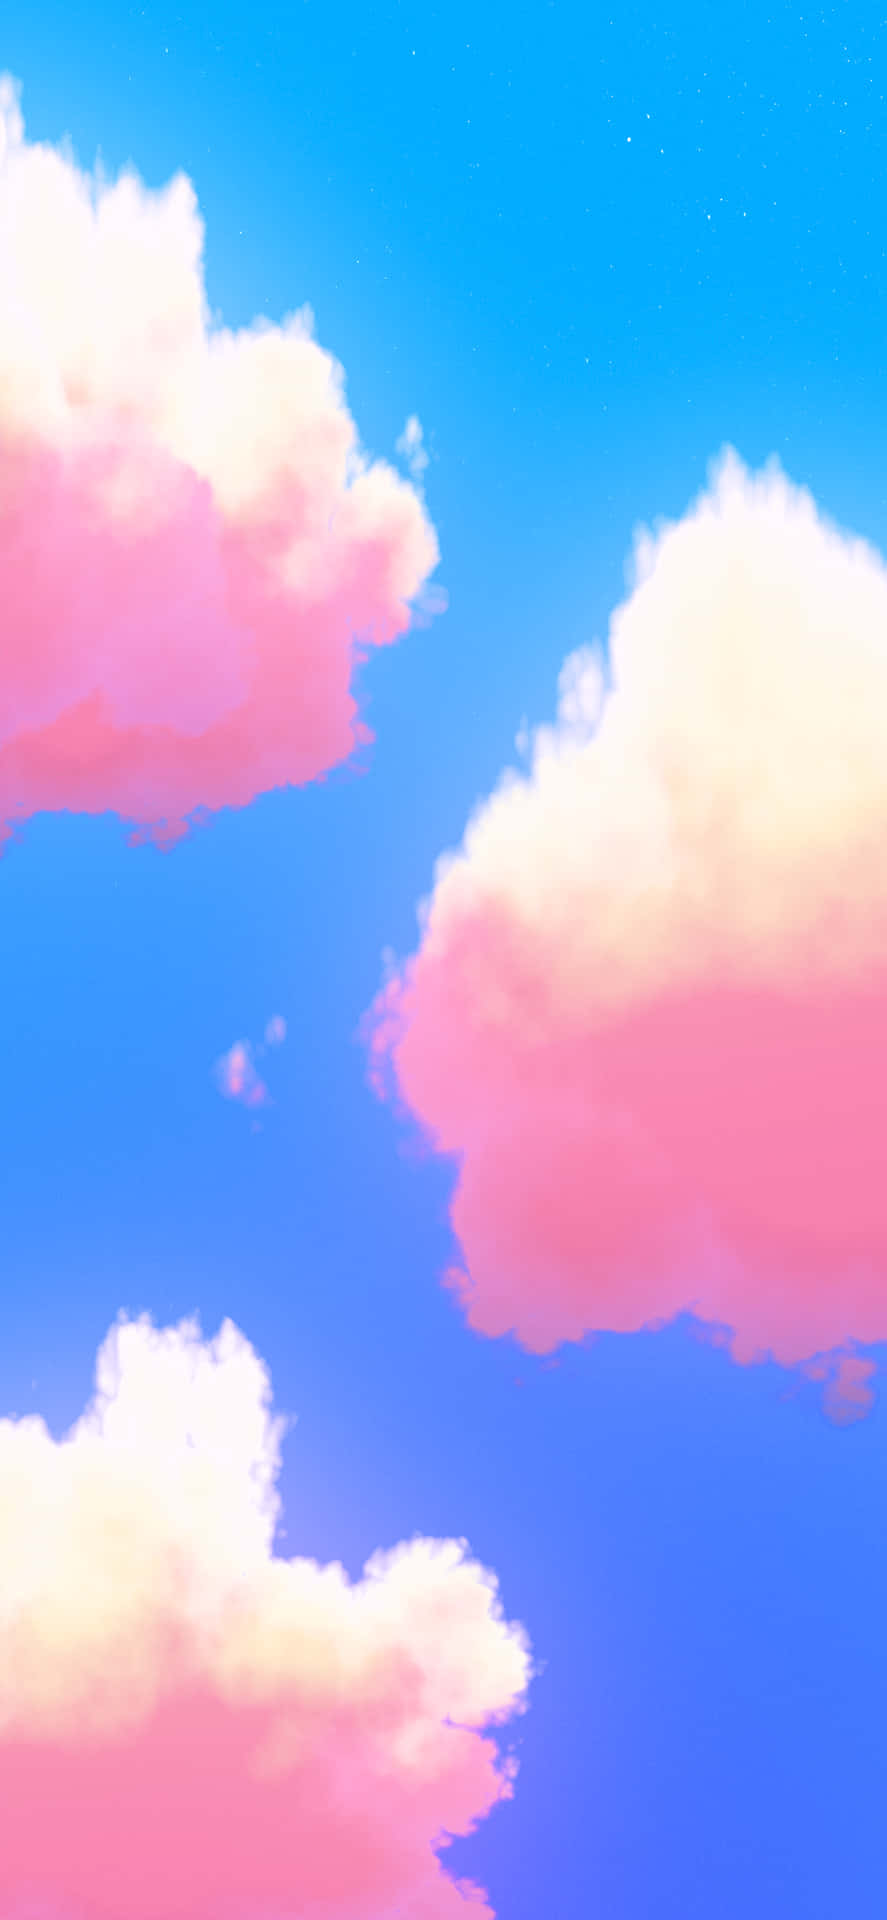 Pink and Blue Clouds in the Sky Wallpaper